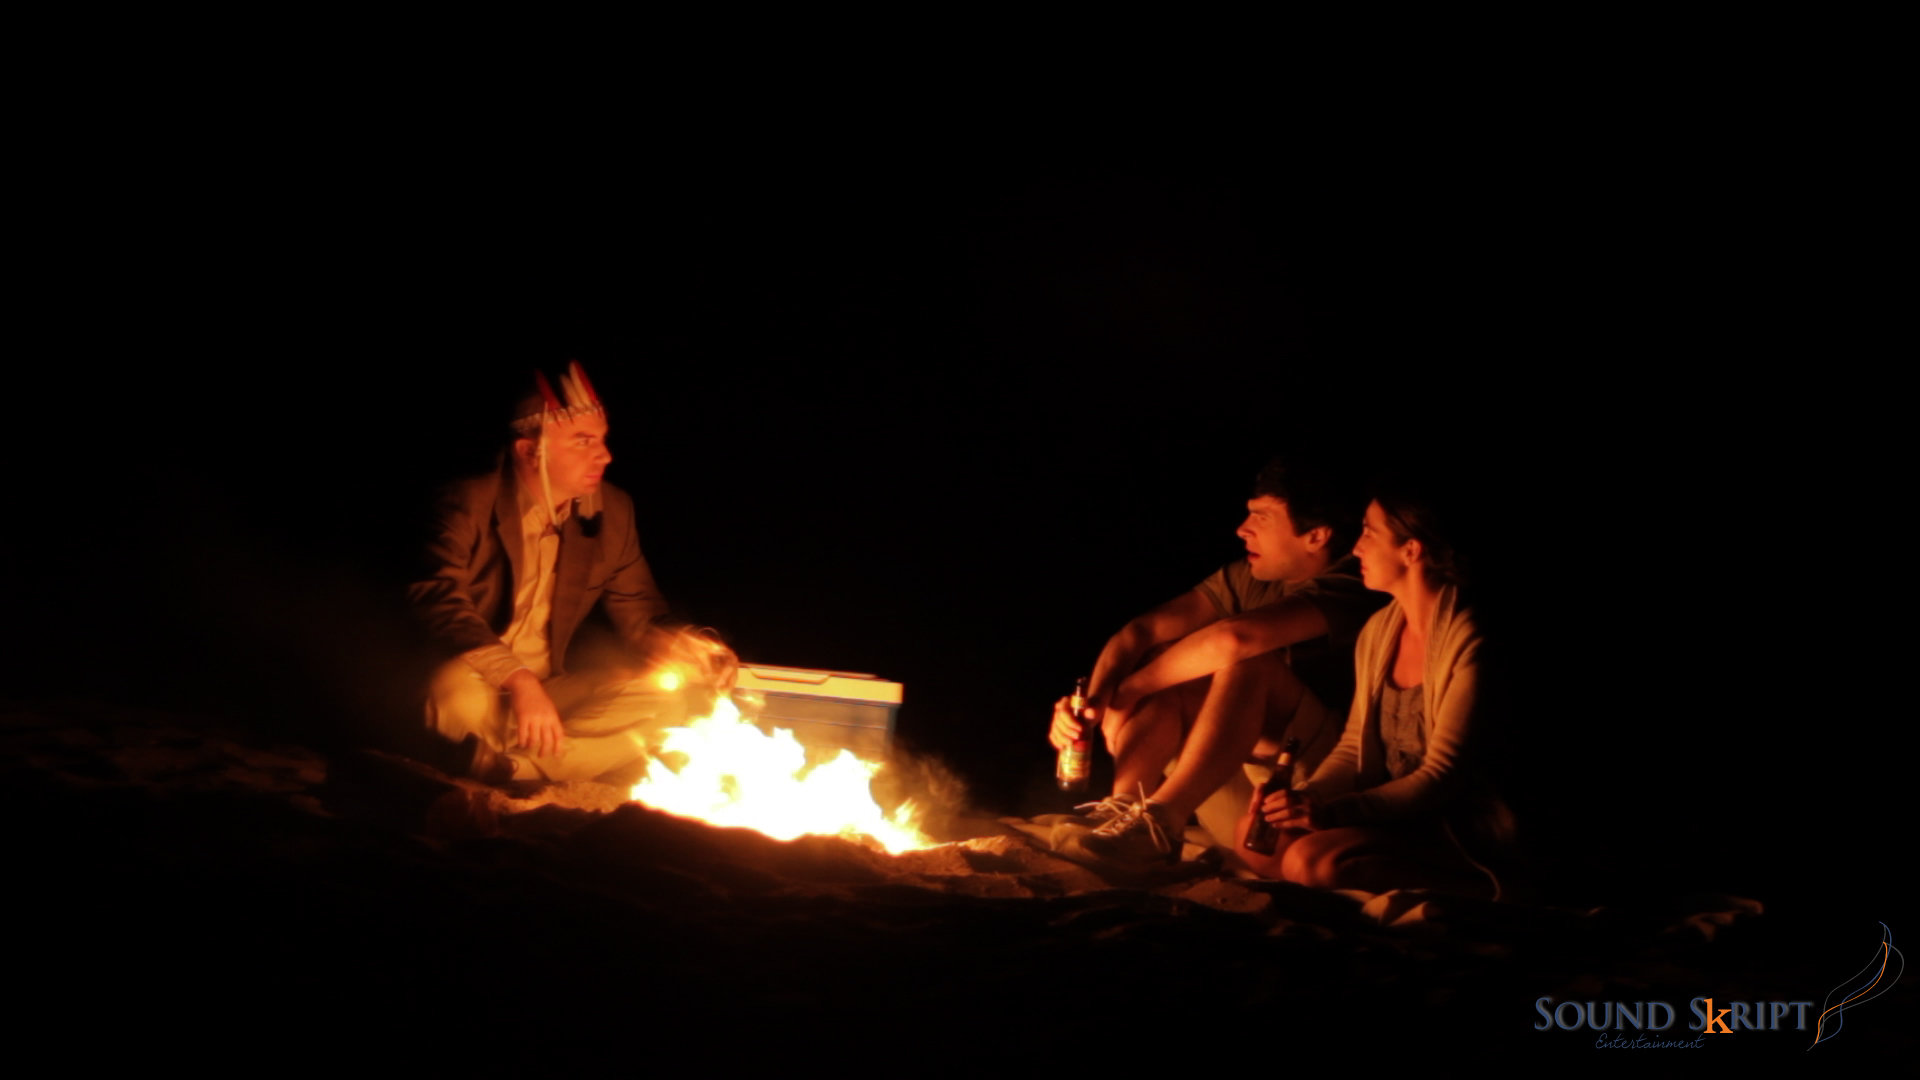 Life lessons from Professor Gavel around an evening campfire.